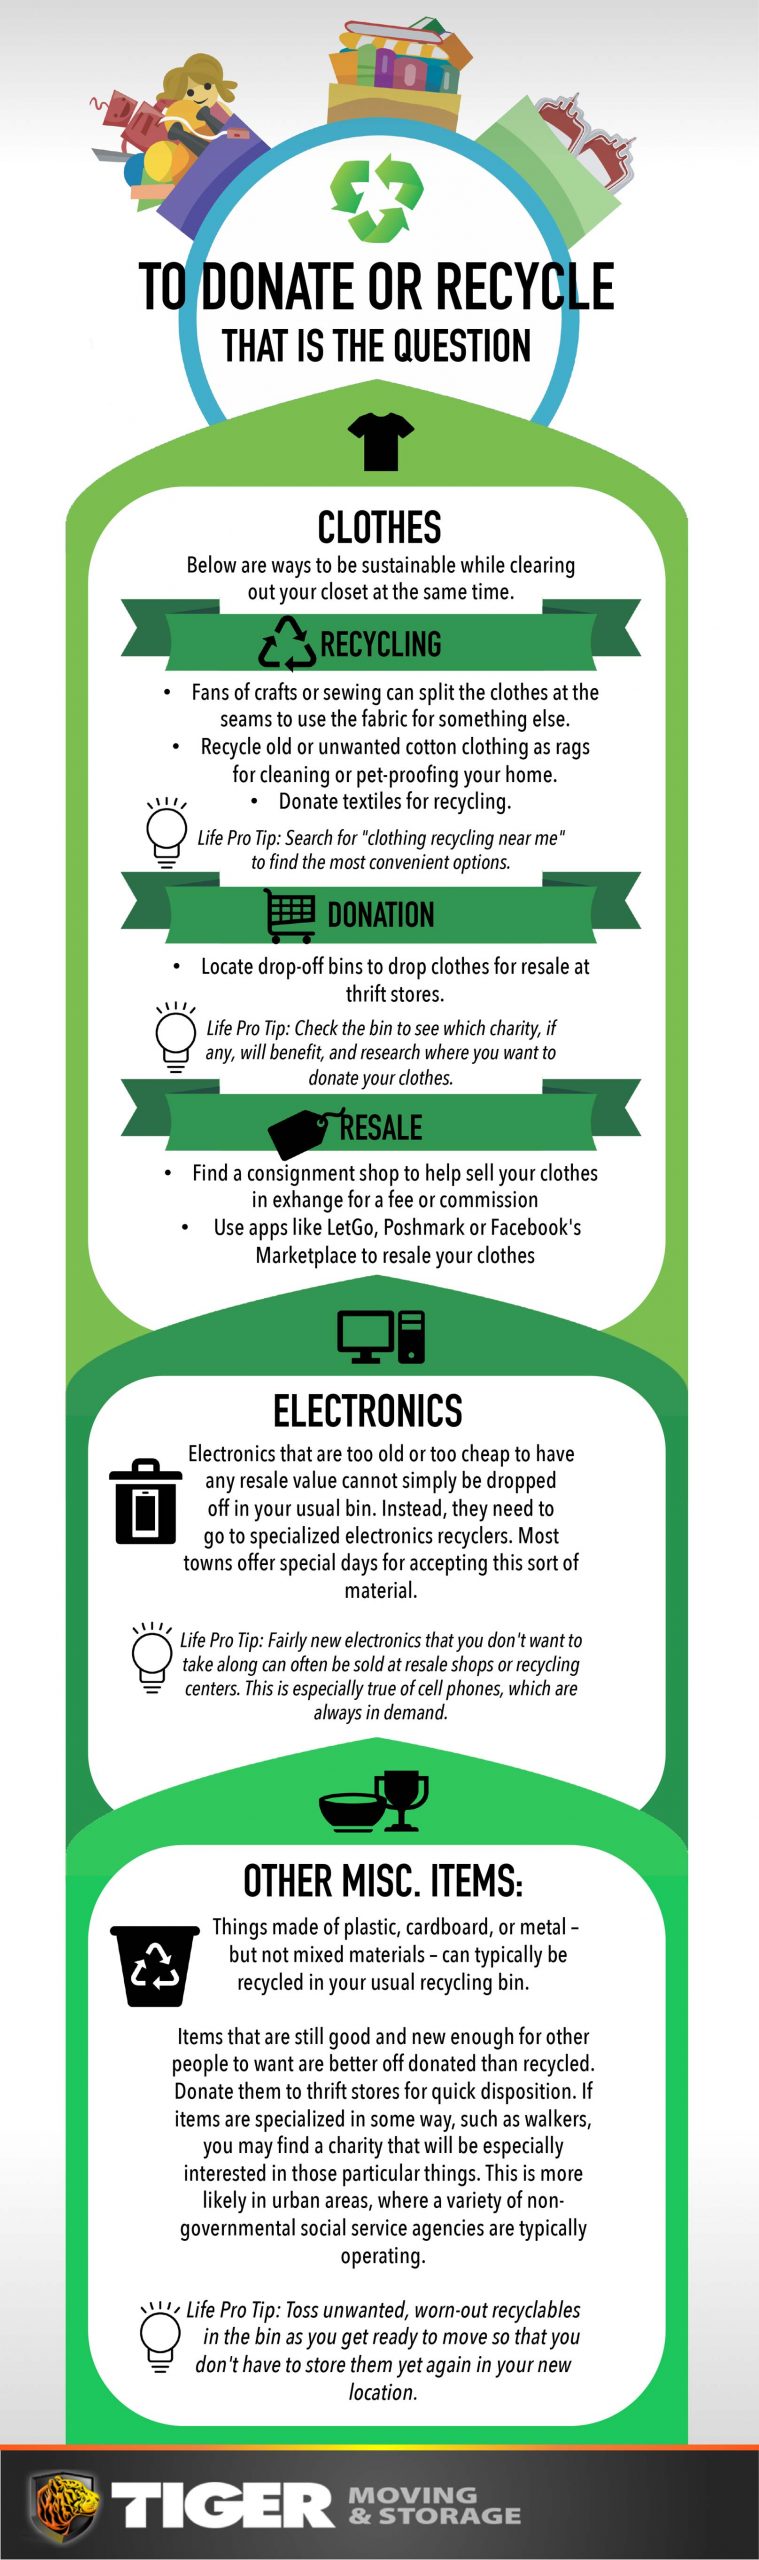 To Donate or Recycle: That Is the Question [Infographic] - Tiger